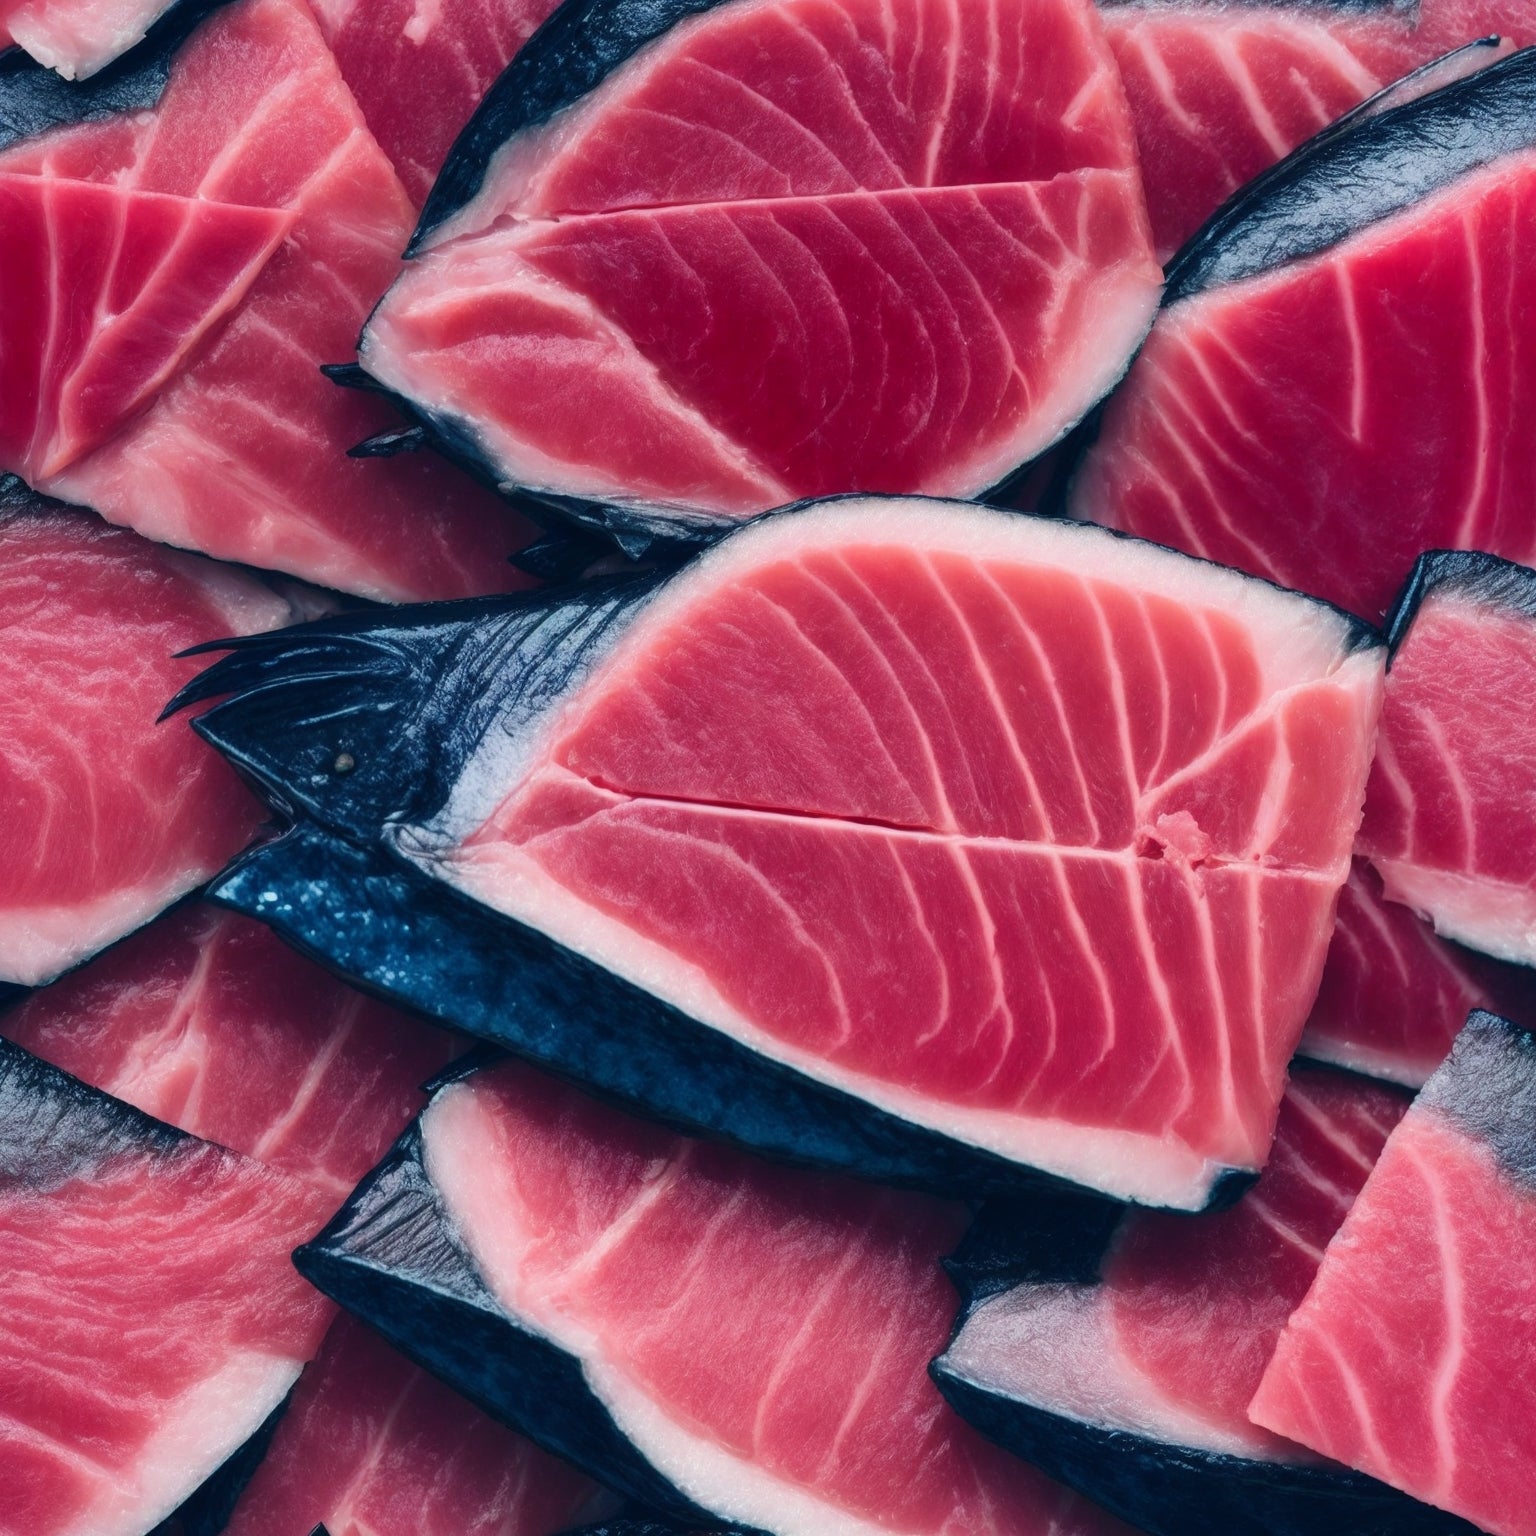 Cooking Bluefin Tuna: Tips and Delicious Recipes to Try